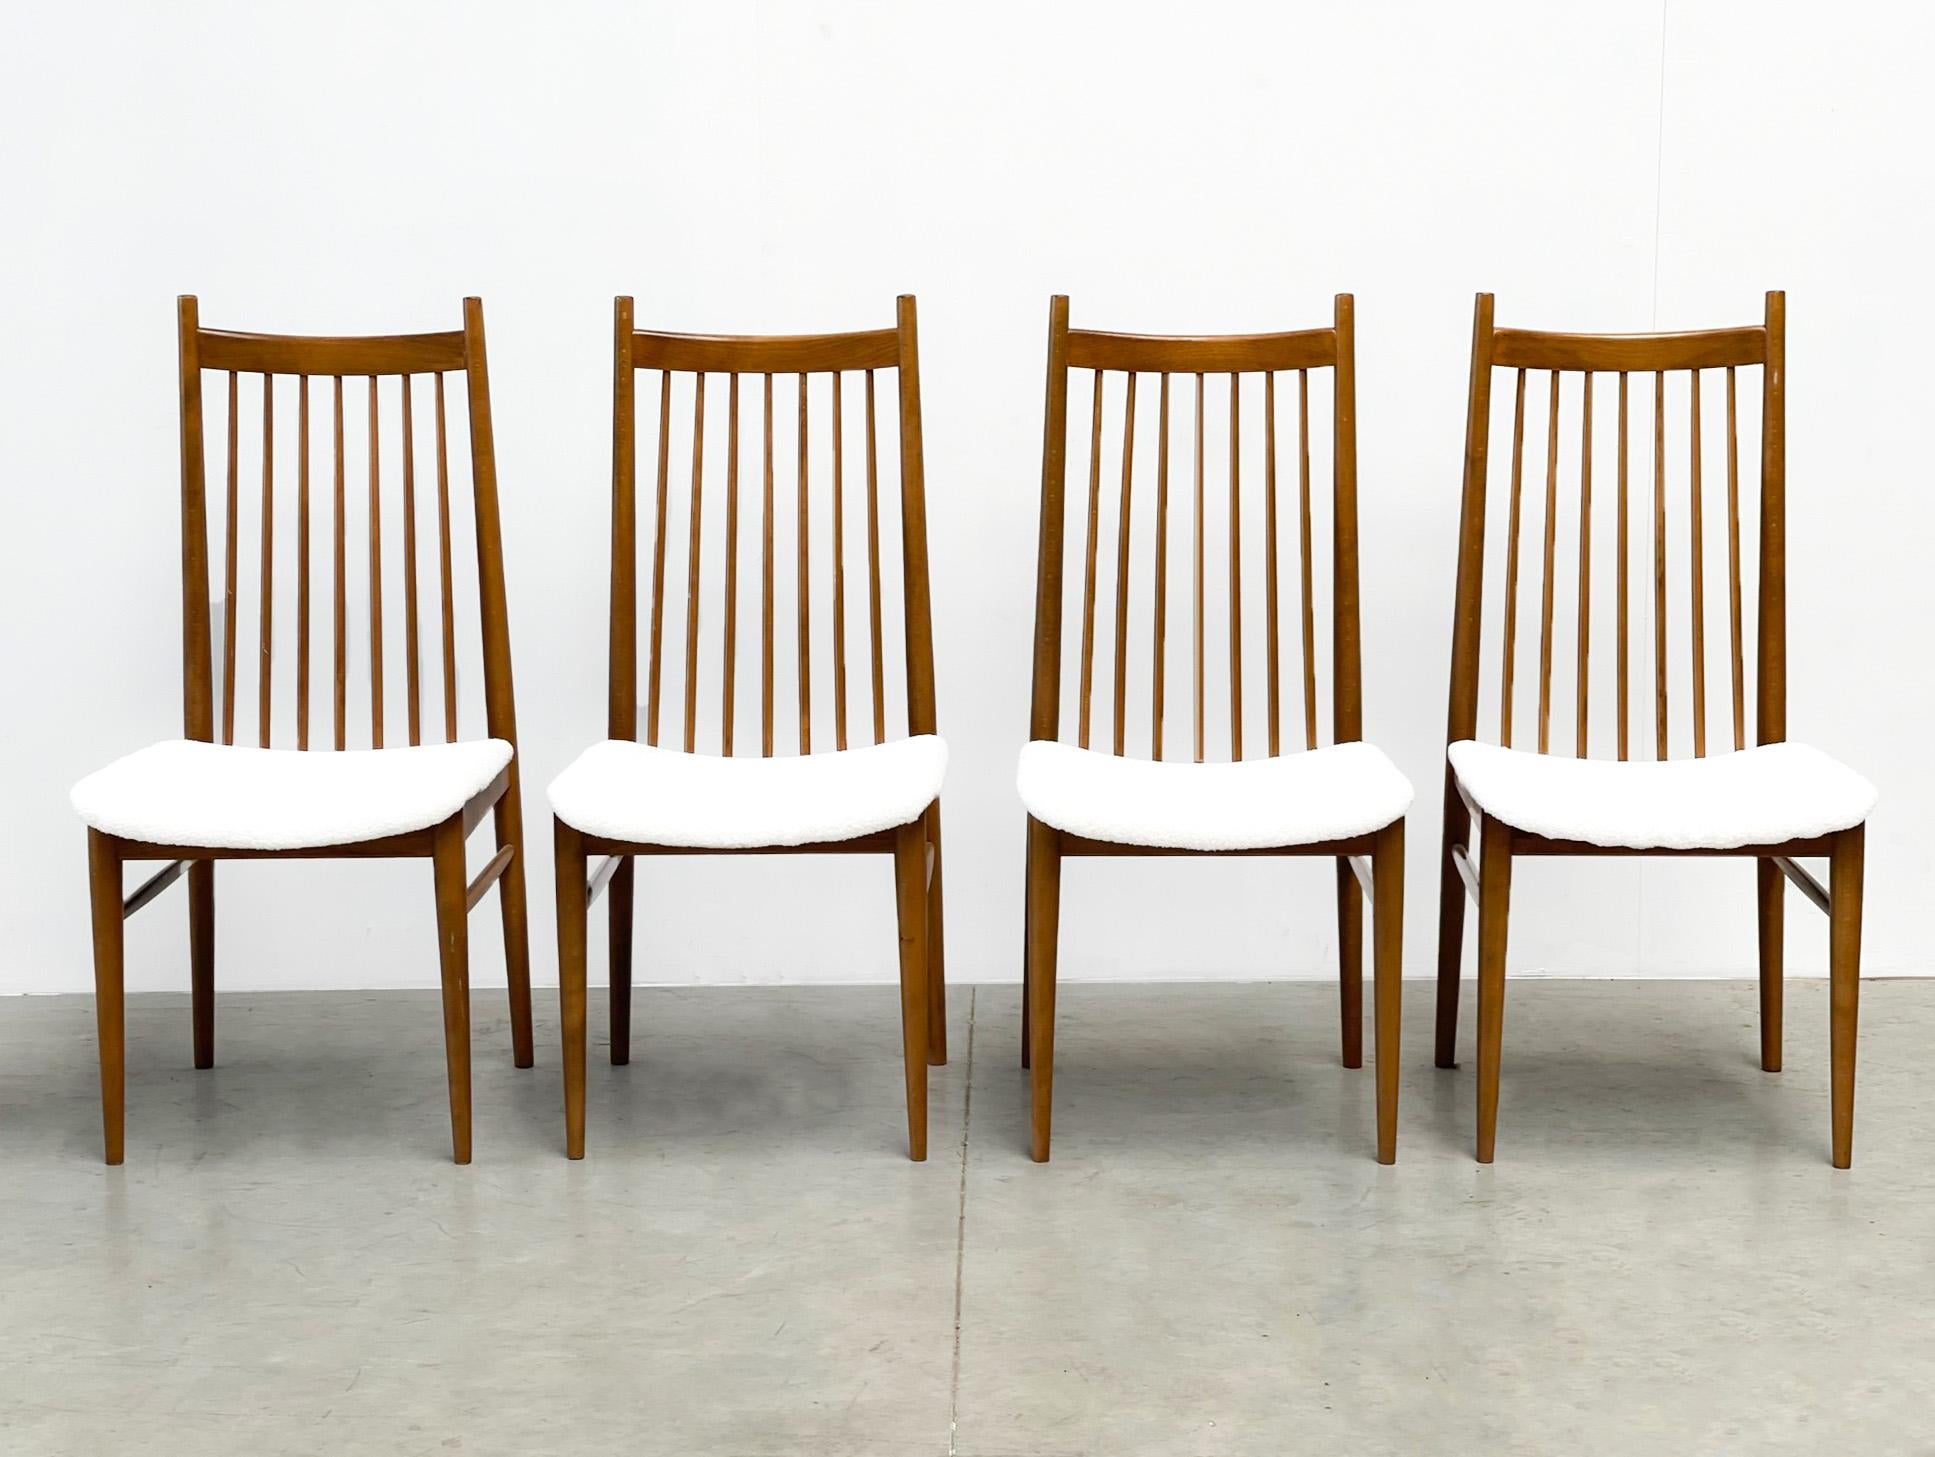 Set of four Dutch dining chairs
Very nice and high quality dining chairs. These chairs were probably designed in the Netherlands by a small manufacturer. This is a perfect example of fine craftsmanship and quality. The chairs have been reupholstred